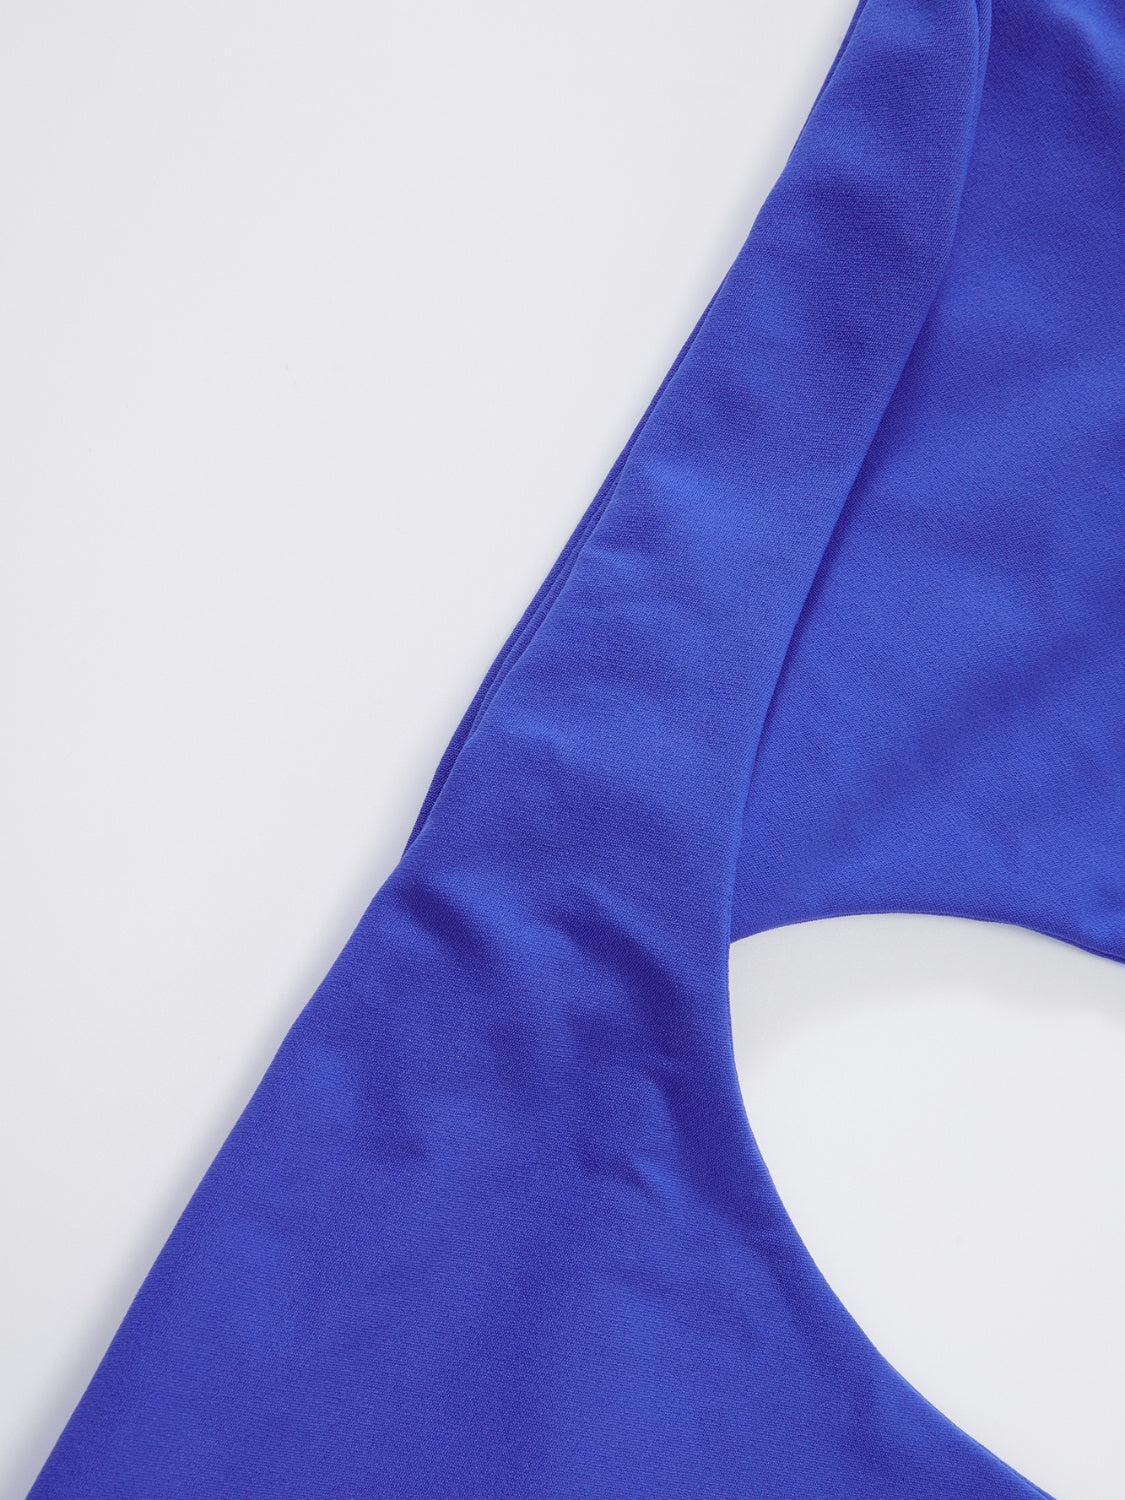 a close up of a blue top on a white surface